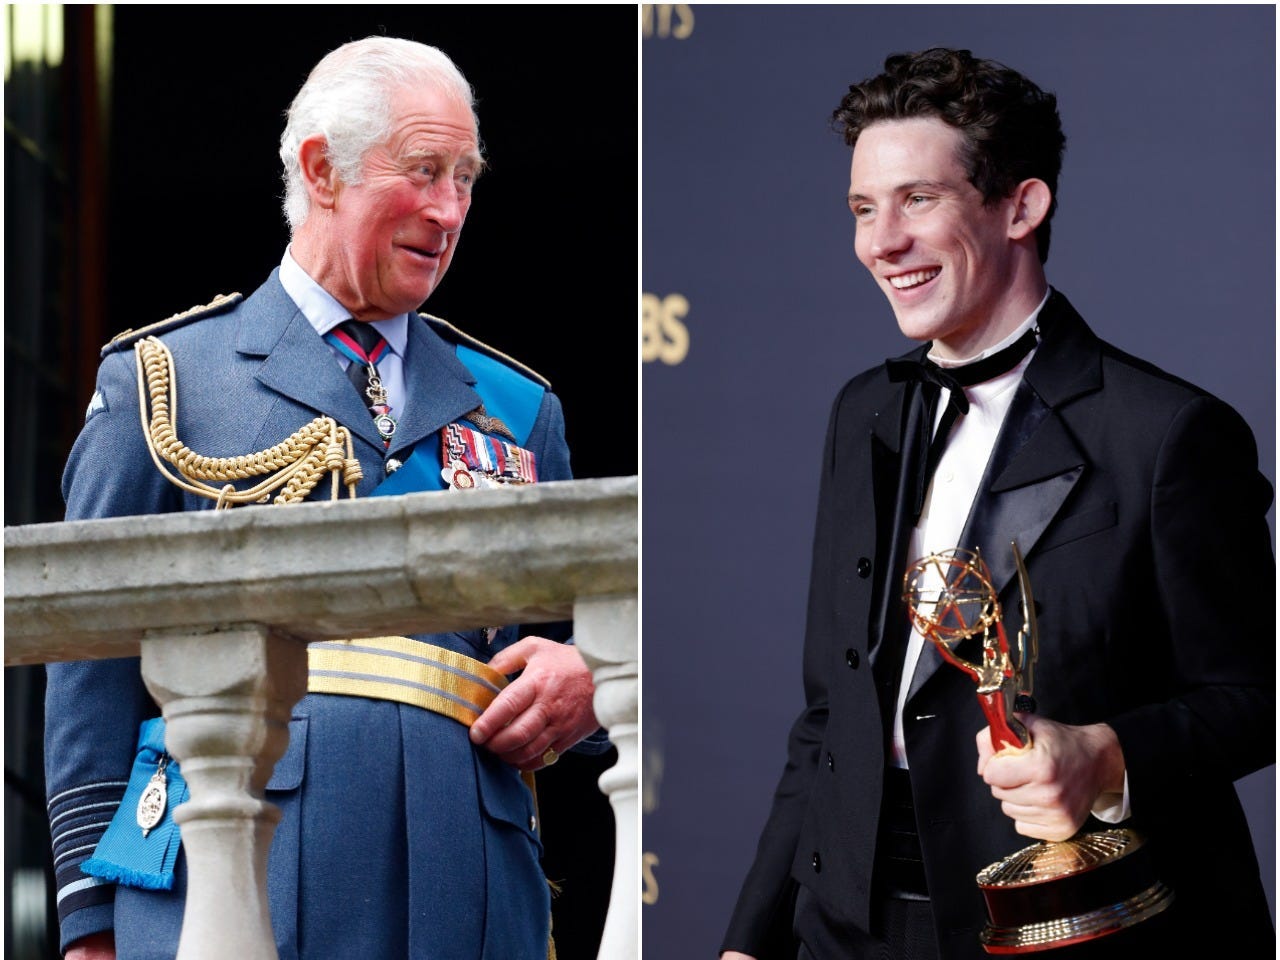 Prince Charles pictured left and Josh O'Connor, who plays him in "The Crown" pictured right.